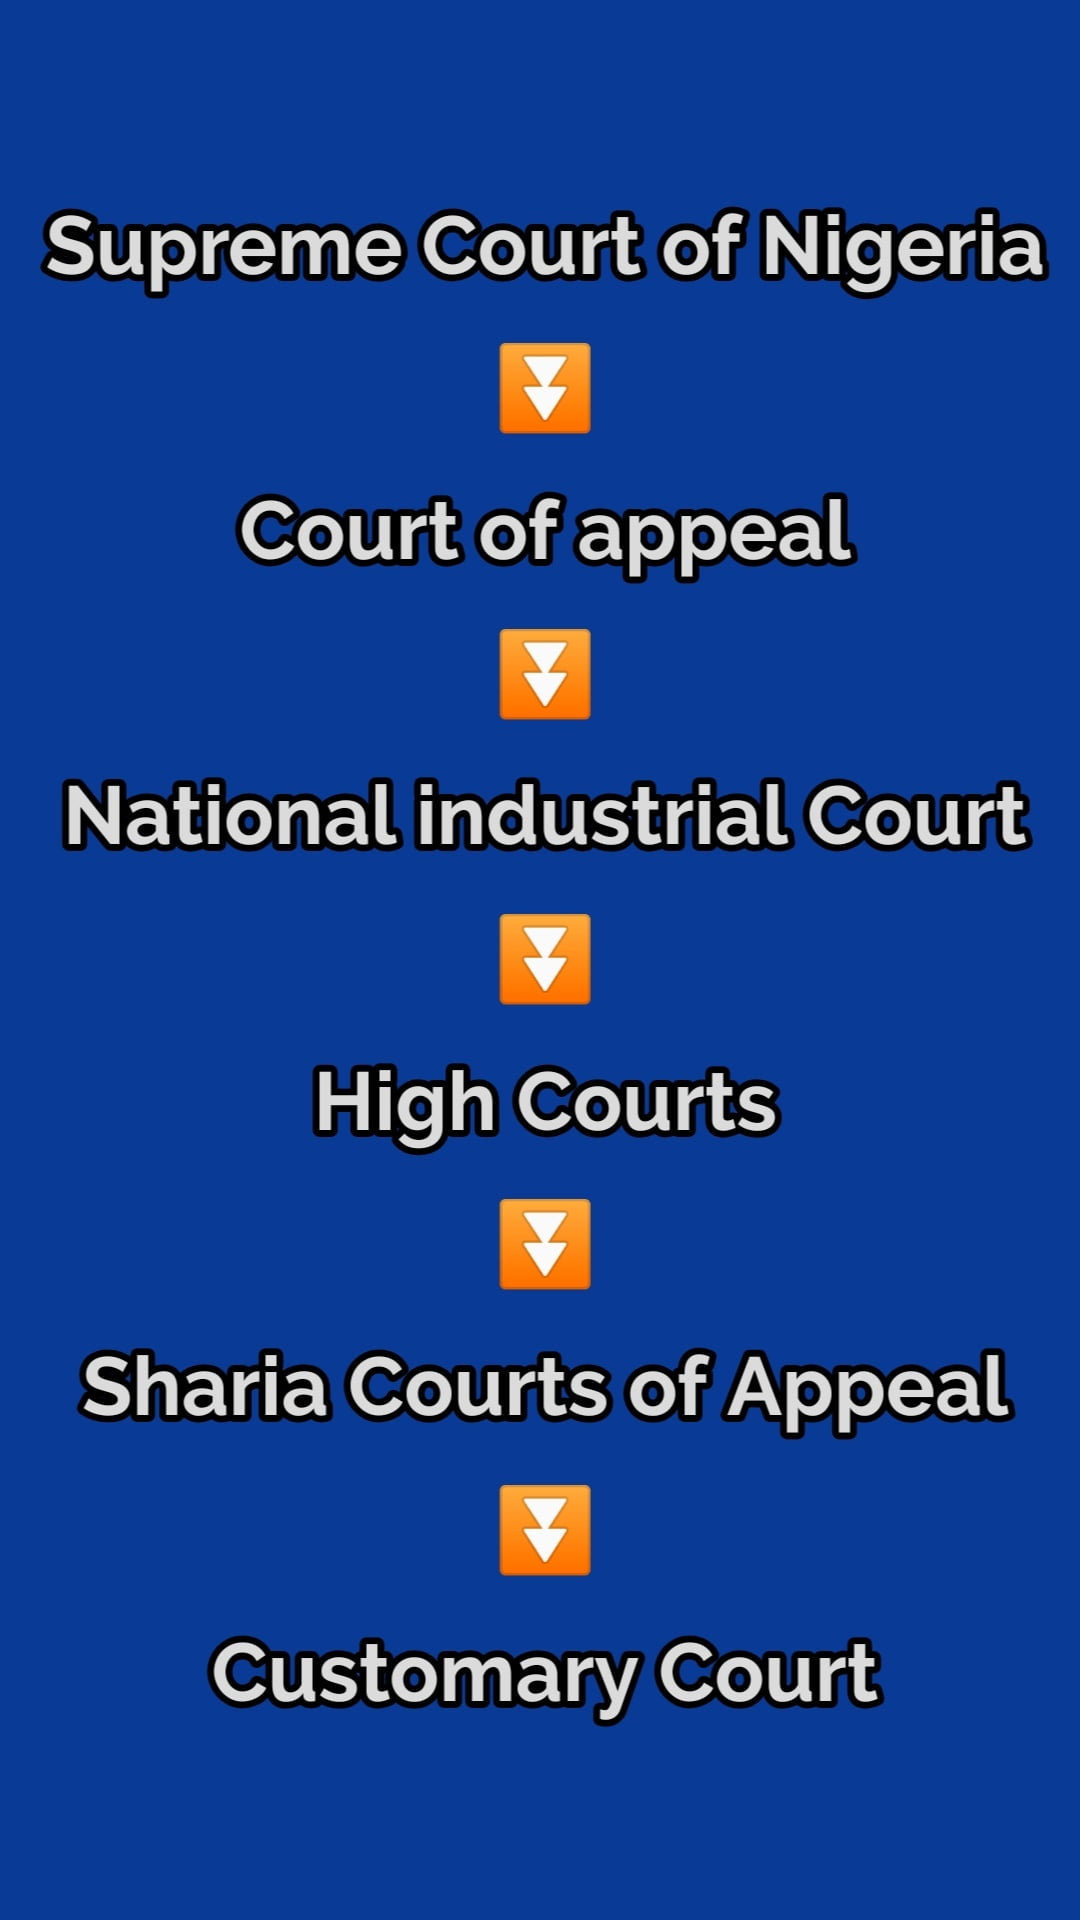 Hierarchy of courts in Nigerian legal system